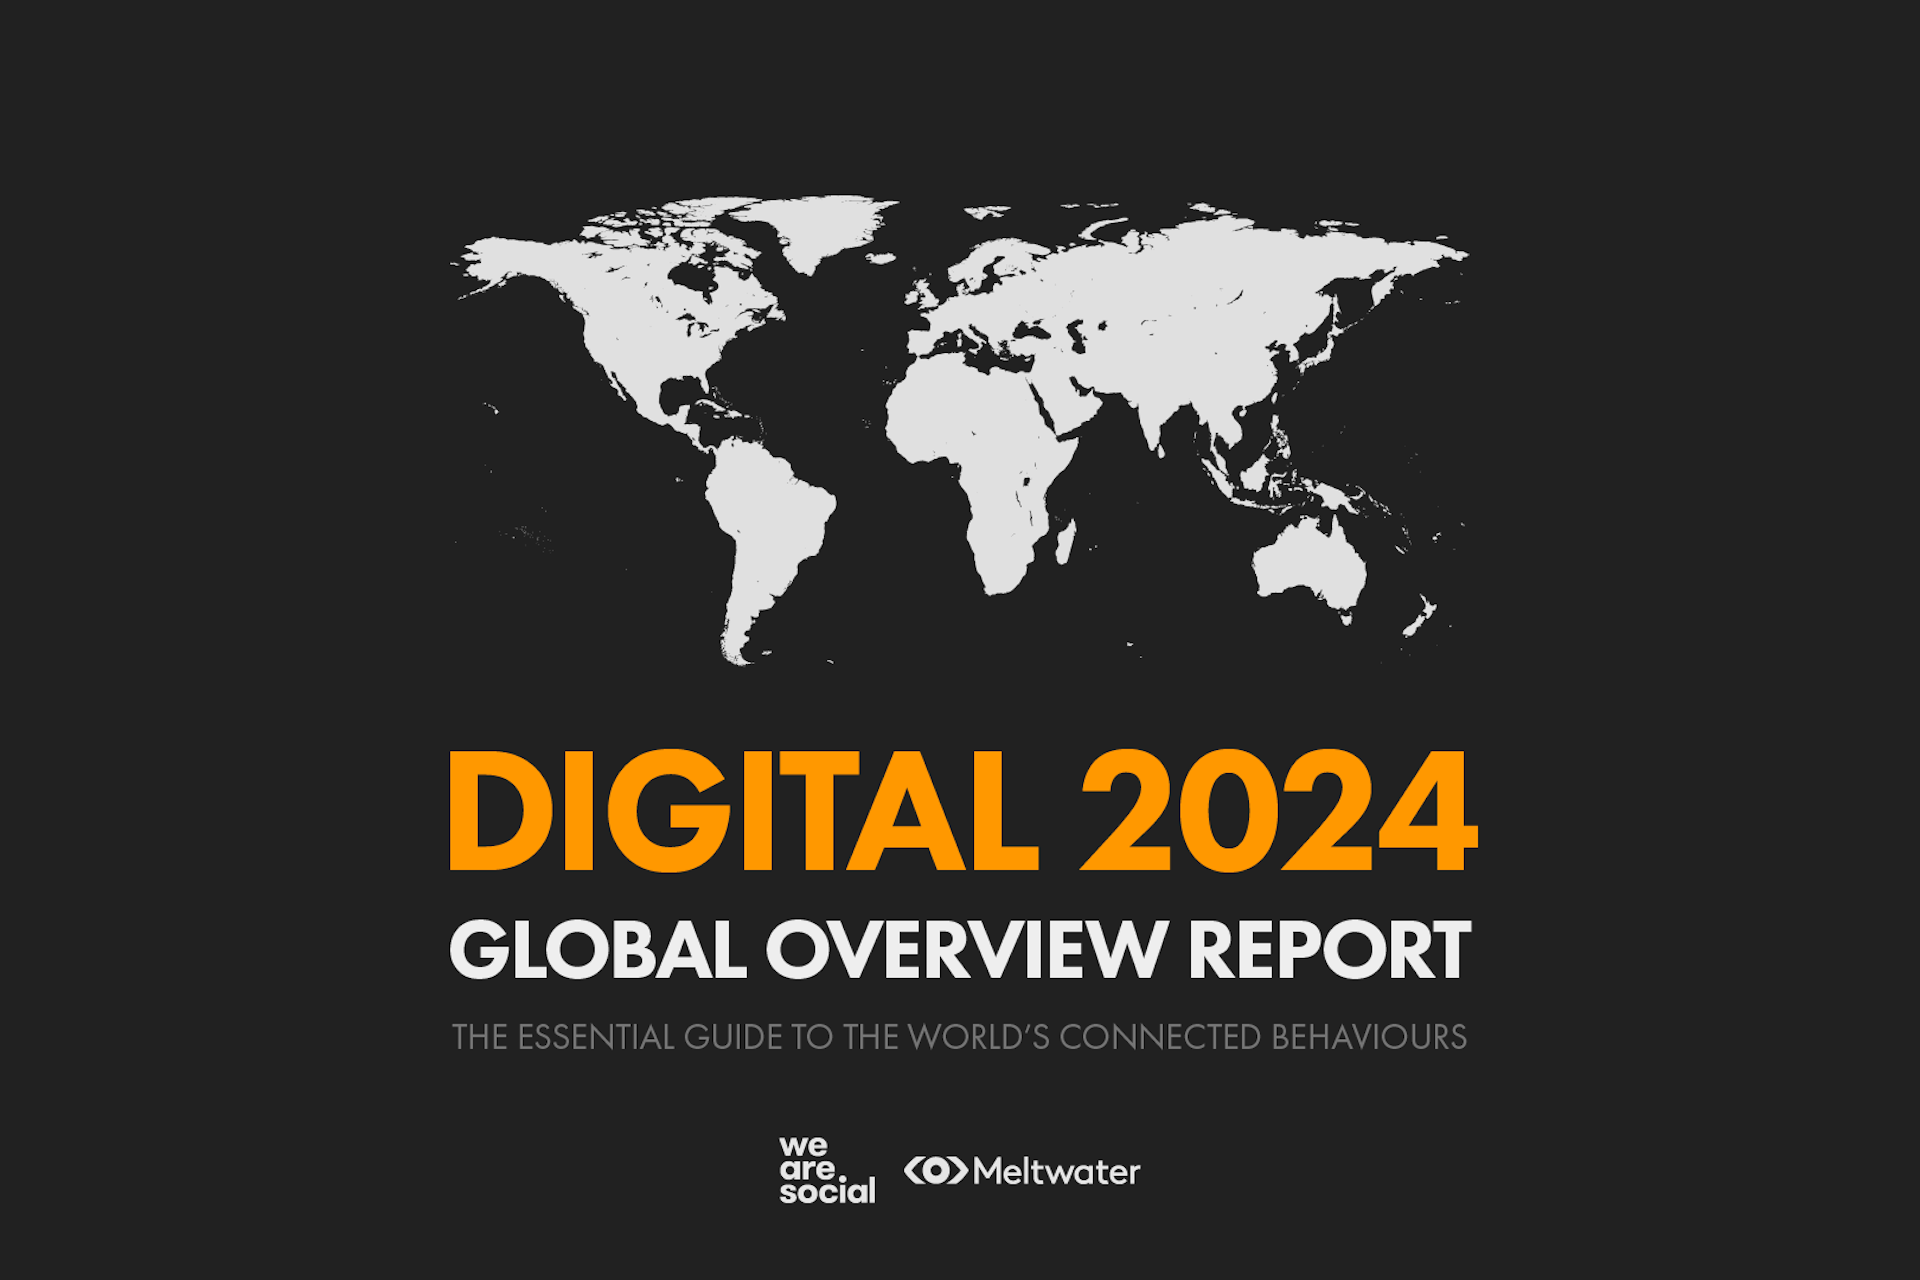 The cover of the Digital 2024 Global Overview Report, the continents in white against a black background, presented by Kepios, Meltwater, and We Are Social.